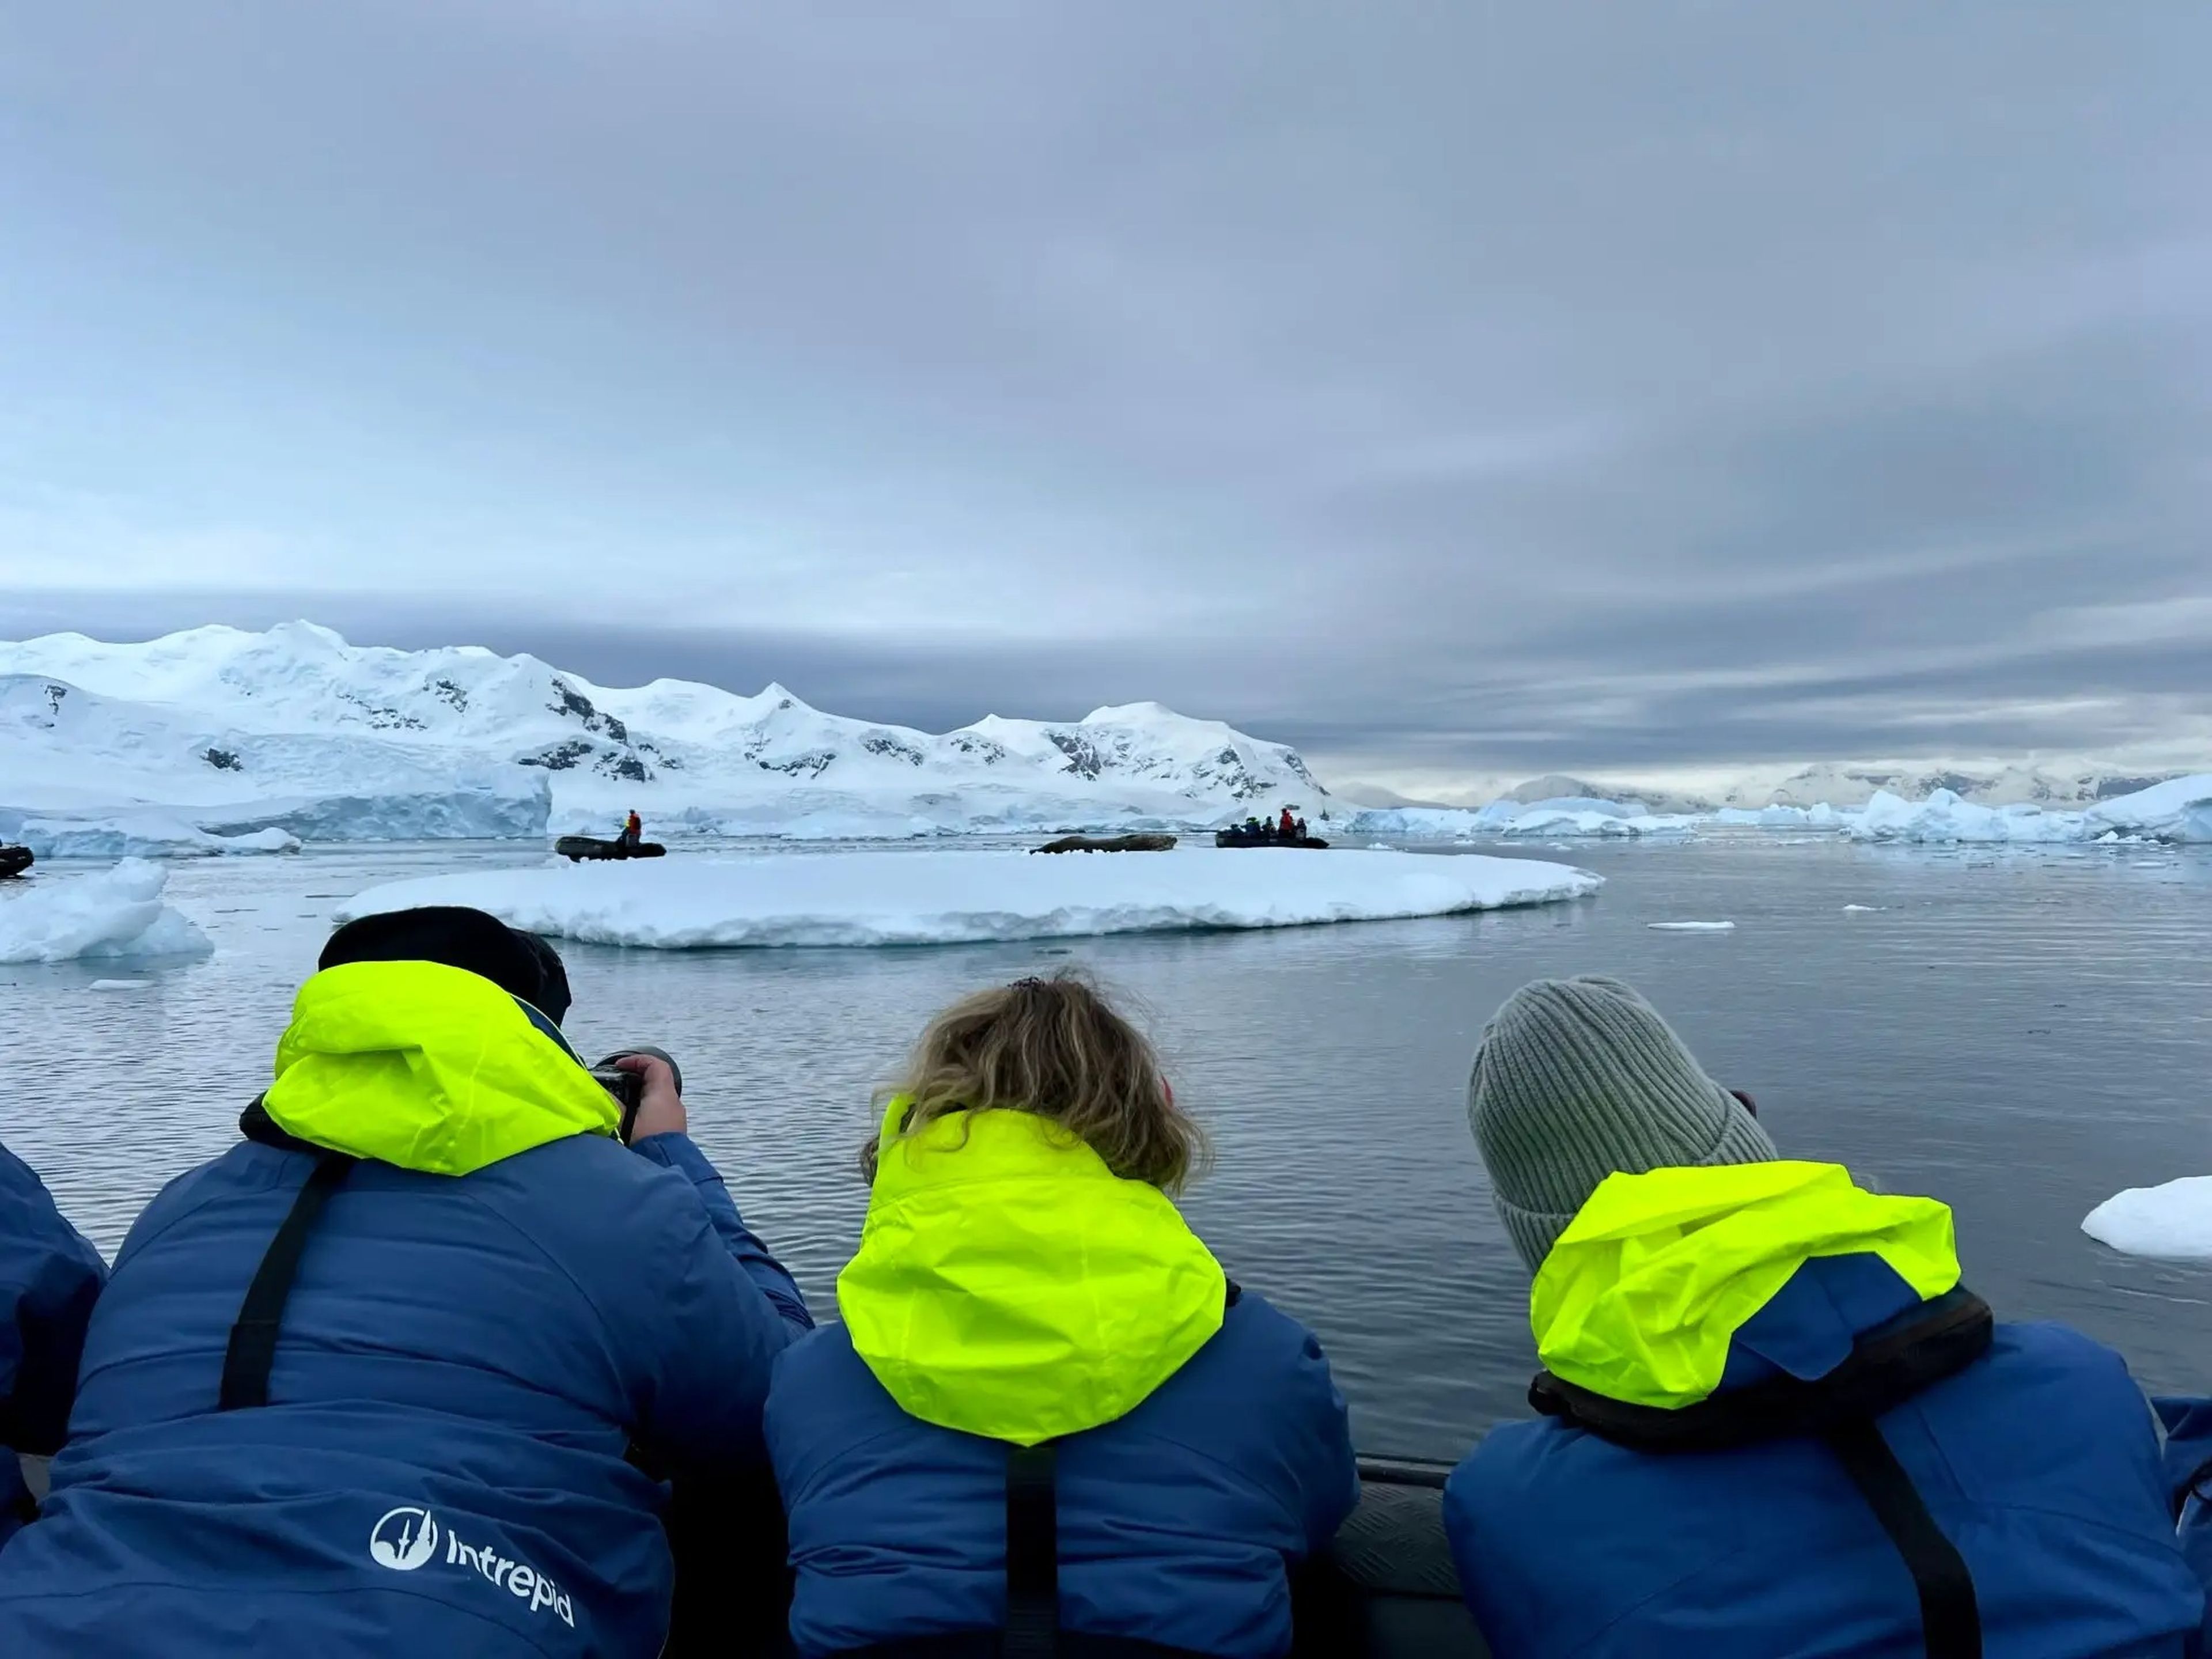 Intrepid Travel passengers looking out at Antarctica.